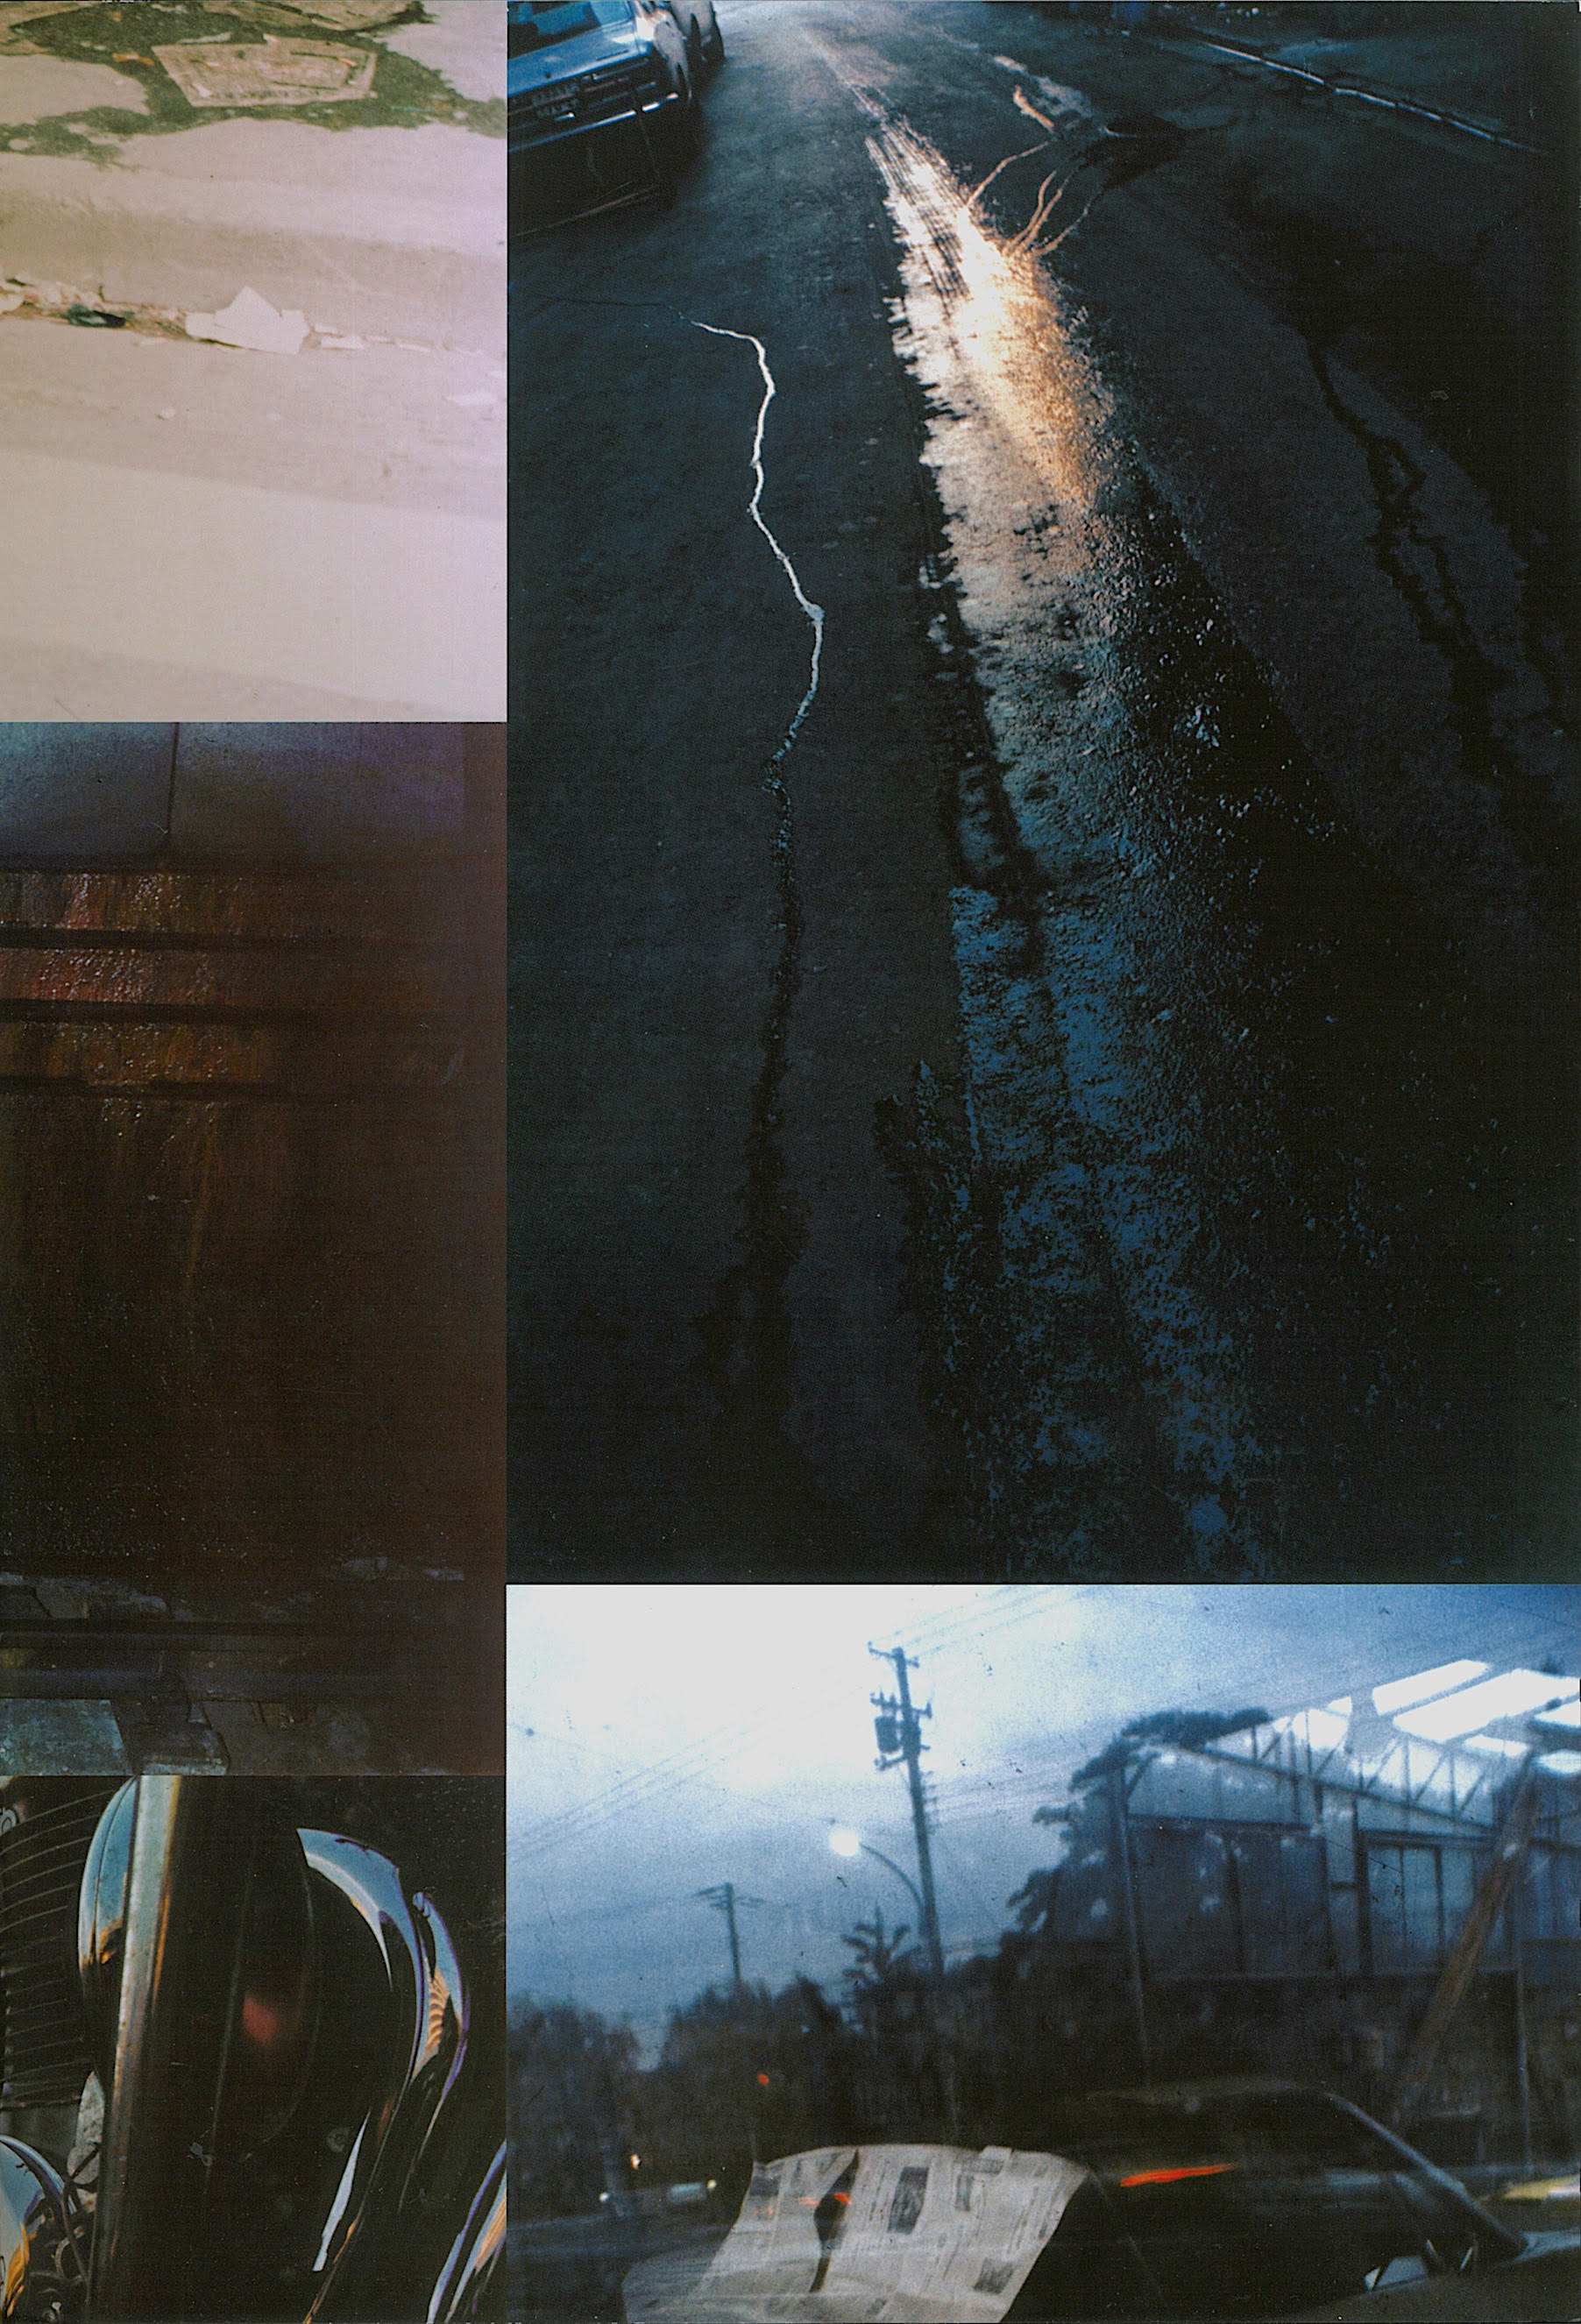 An Illustrated Dictionary of Urban Overflows: Nakahira Takuma&rsquo;s Urban Photography and Writing